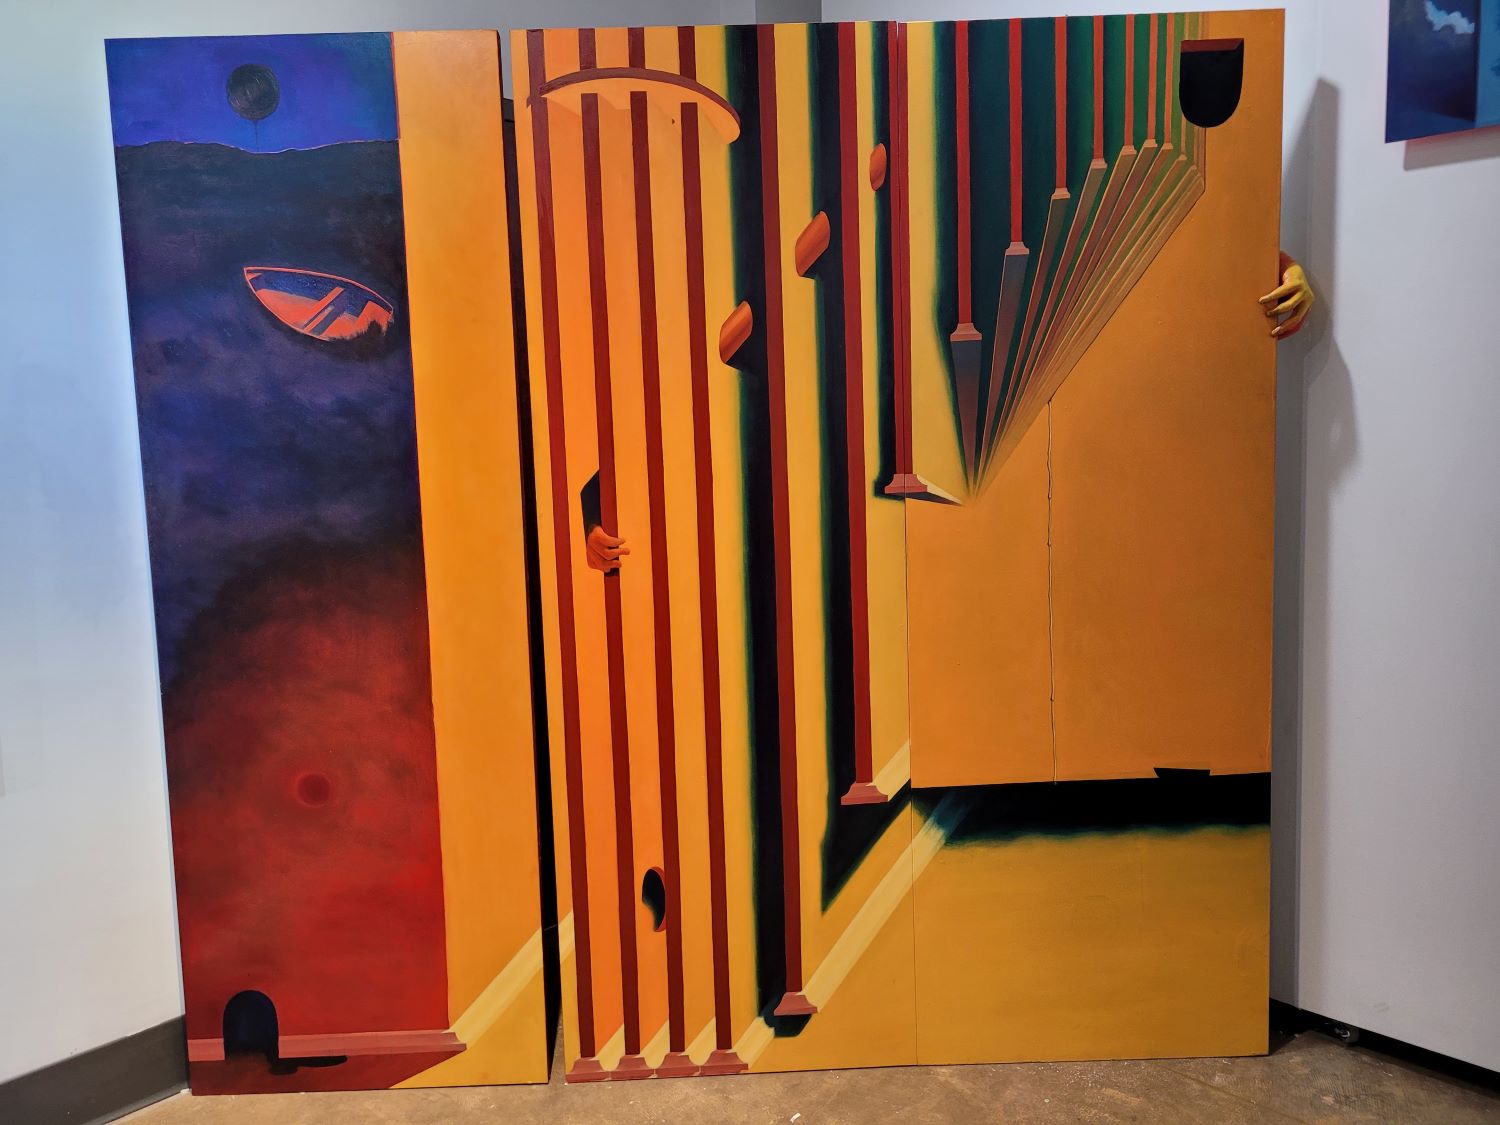 3 paintings on separate doors with surreal interior space, 3D hand on right side of doors